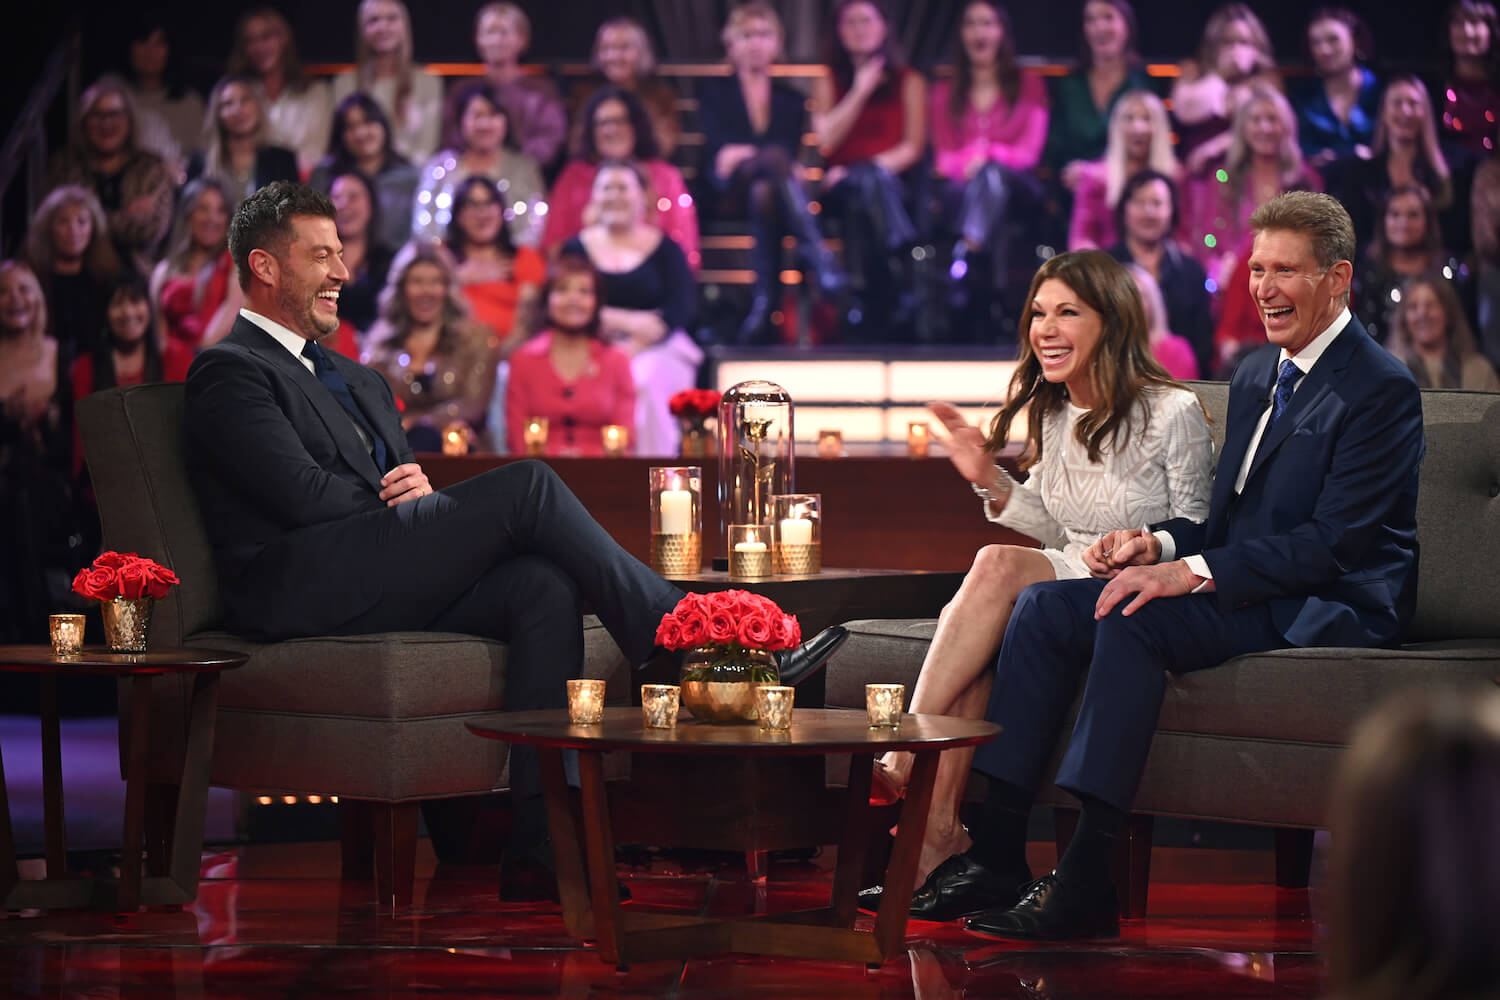 'The Golden Bachelor' stars Theresa Nist and Gerry Turner sitting next to each other across from Jesse Palmer during the After the Final Rose